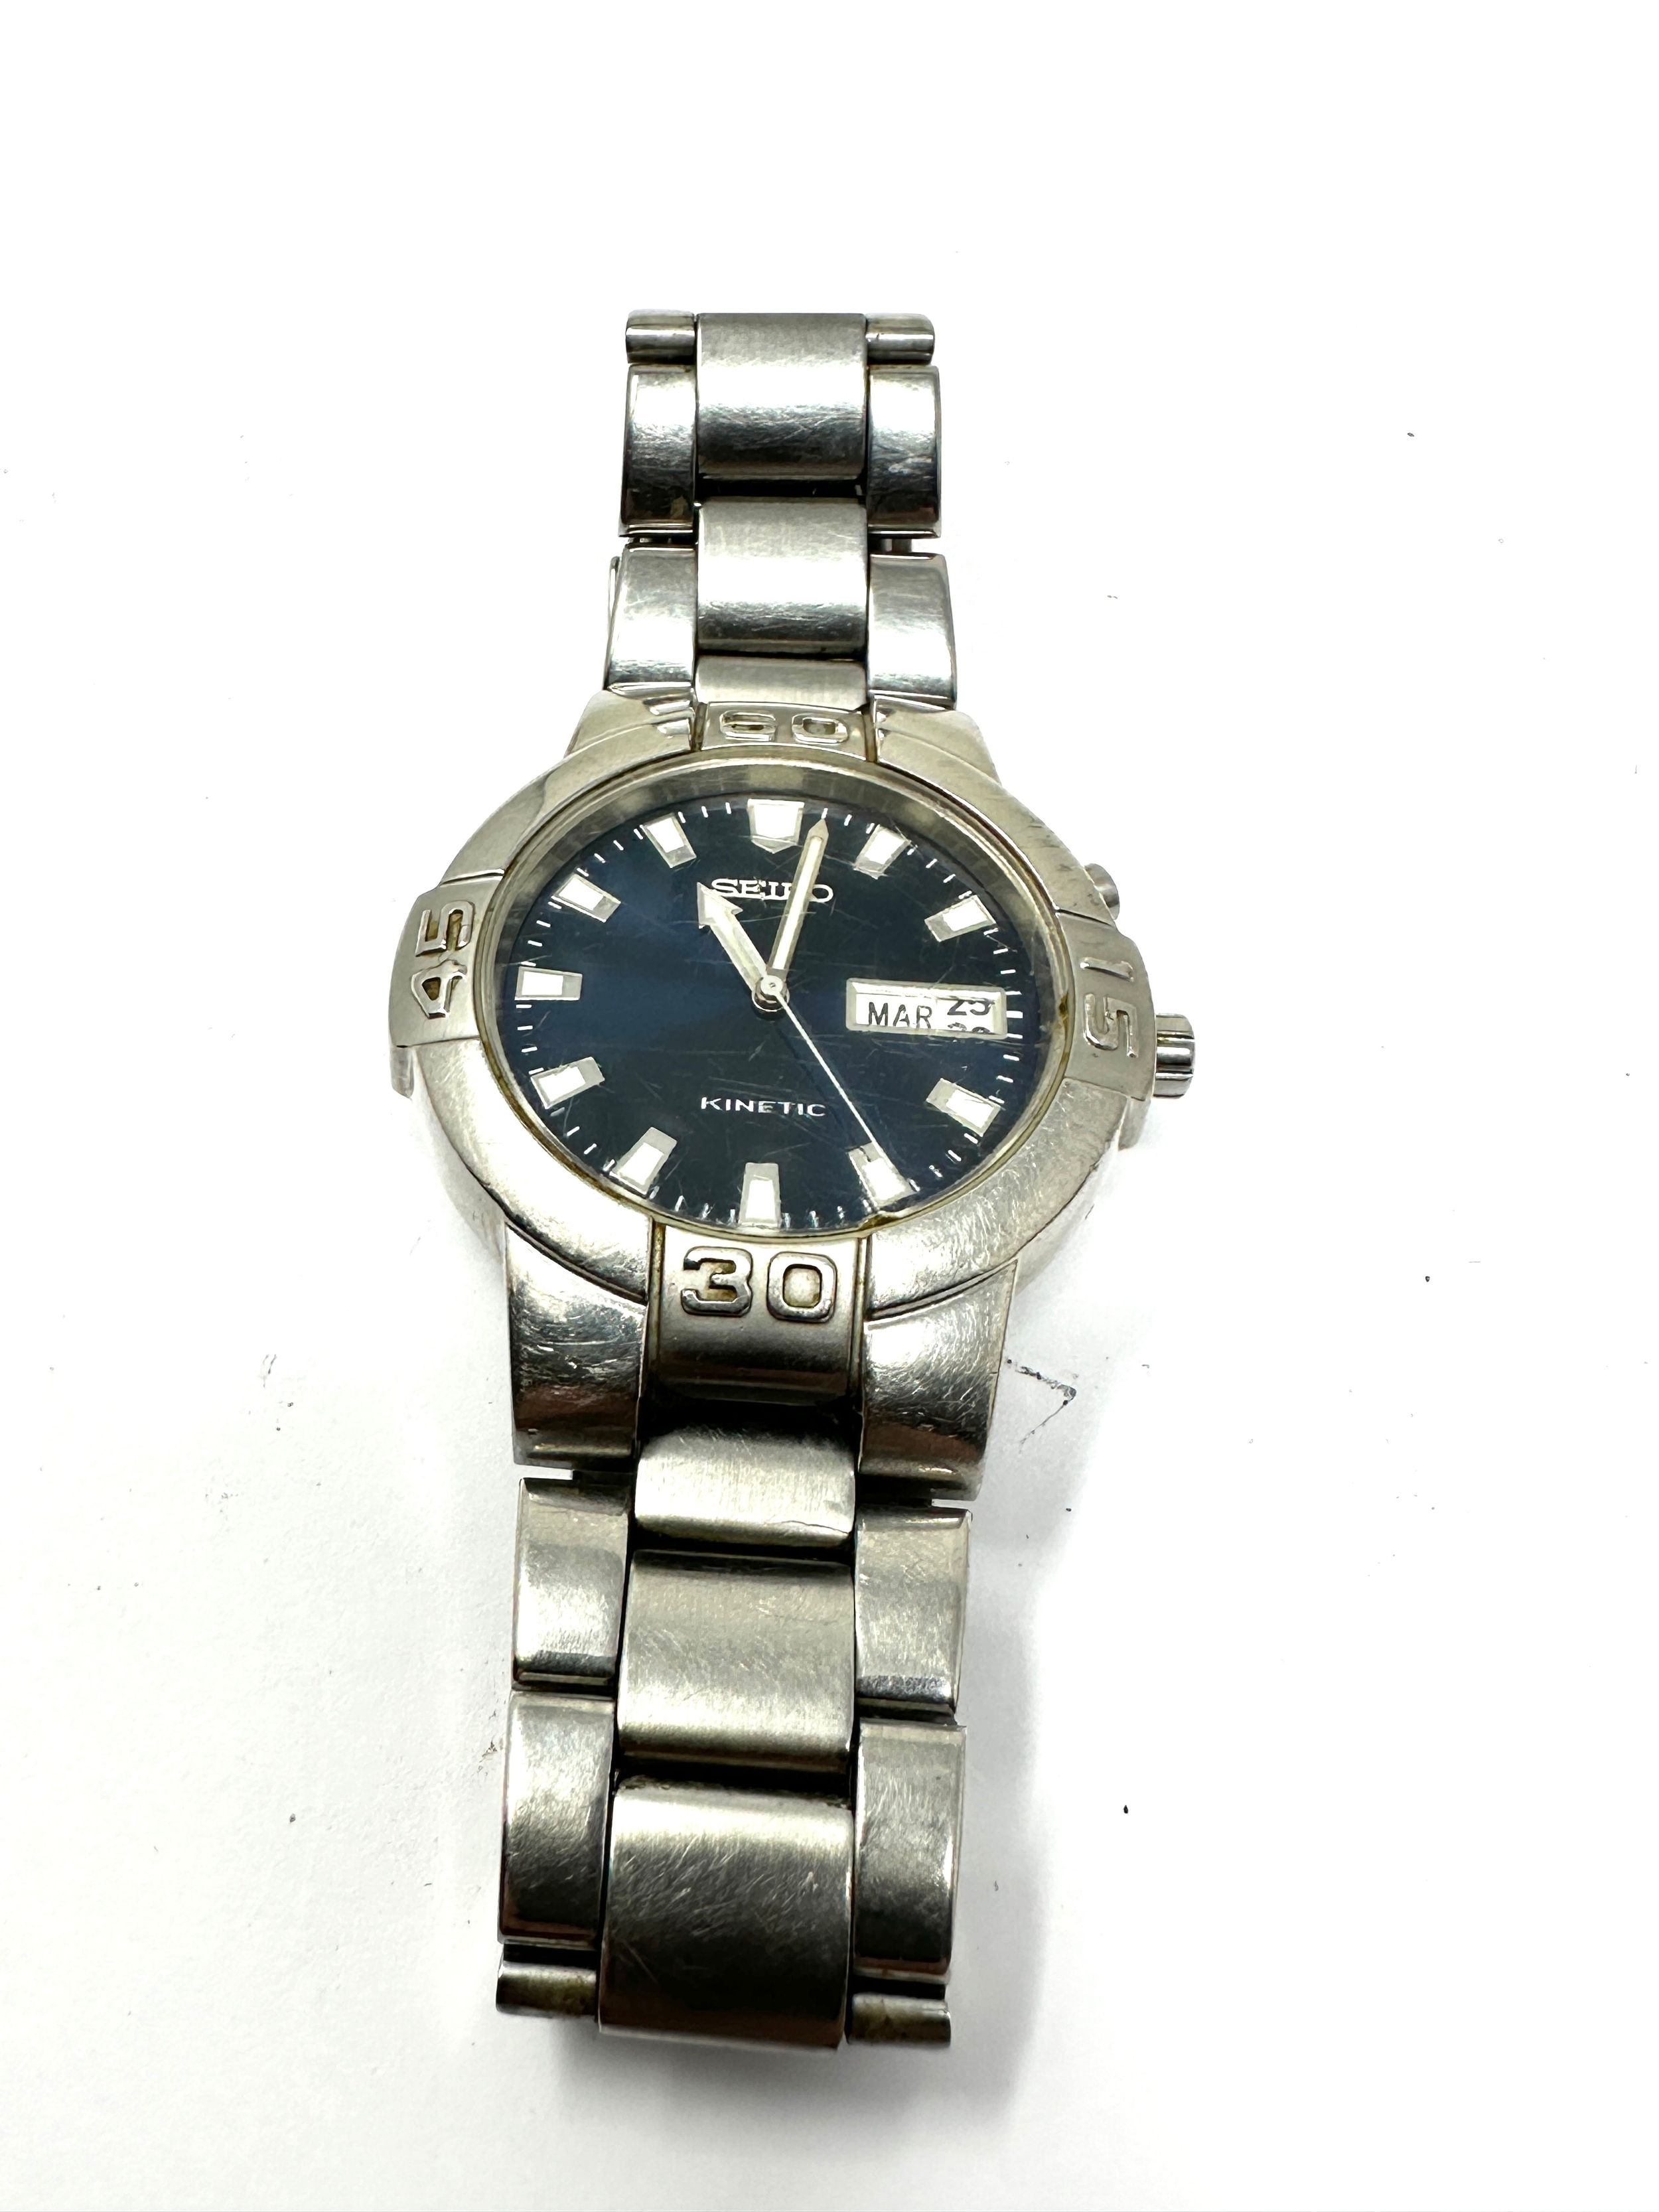 Seiko kinetic gents wristwatch 5m63-0c00 the watch is ticking